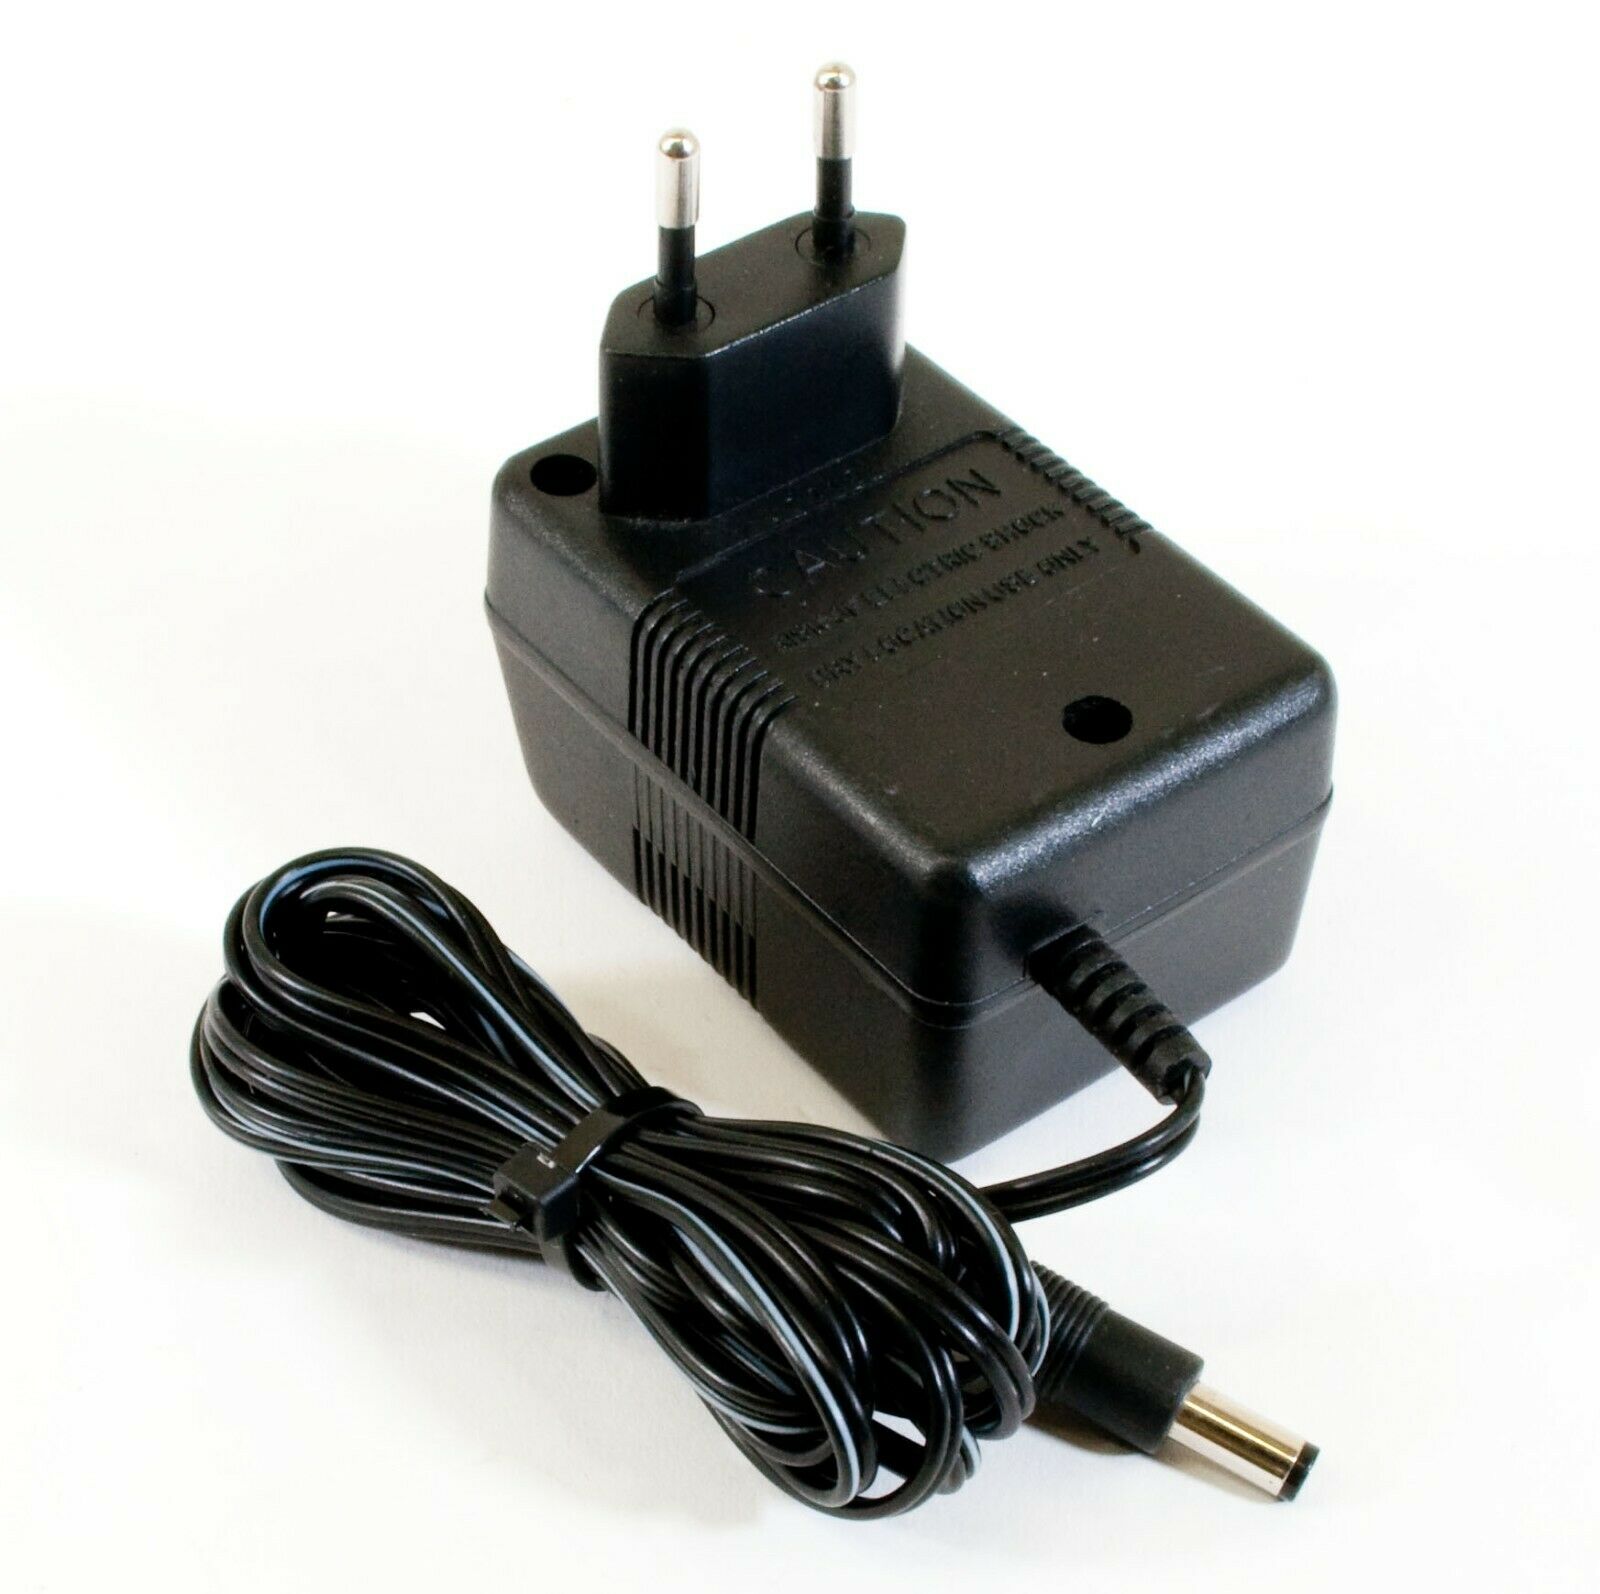 G090050D31 AC Adapter 9V 500mA Original Charger Power Supply Europlug Output Current: 500 mA Type: Power Adapter MPN: